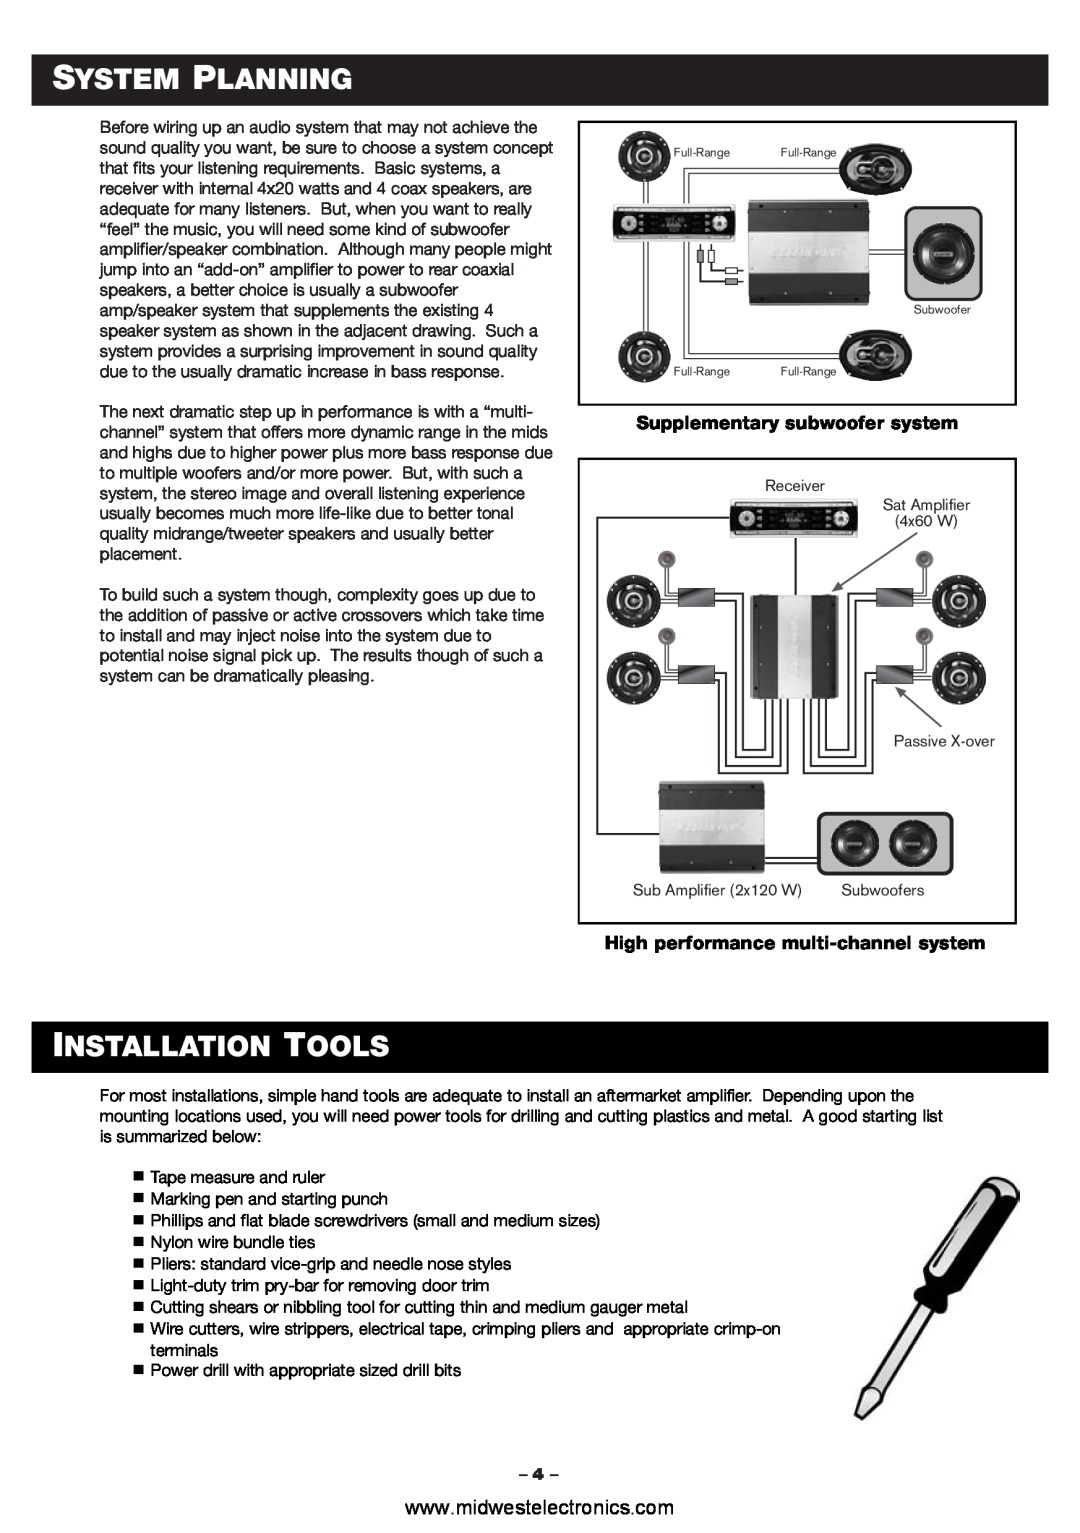 Blaupunkt PCA2120, PCA260 manual System Planning, Installation Tools, Supplementary subwoofer system 